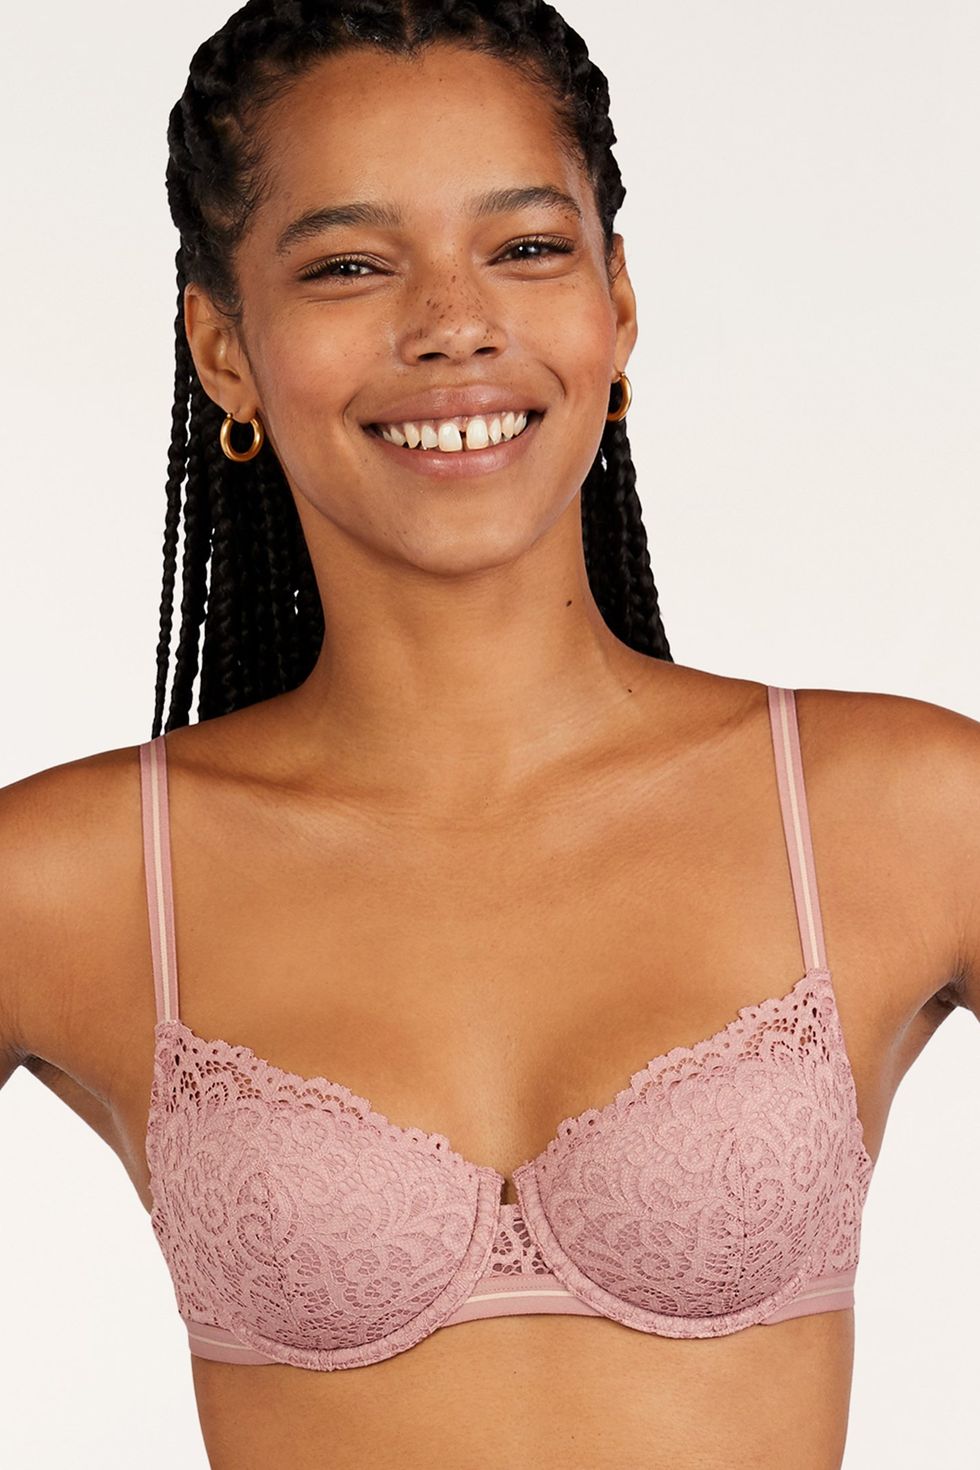 ThirdLove Bra Reviews: The Bra You Won't Have to Think About